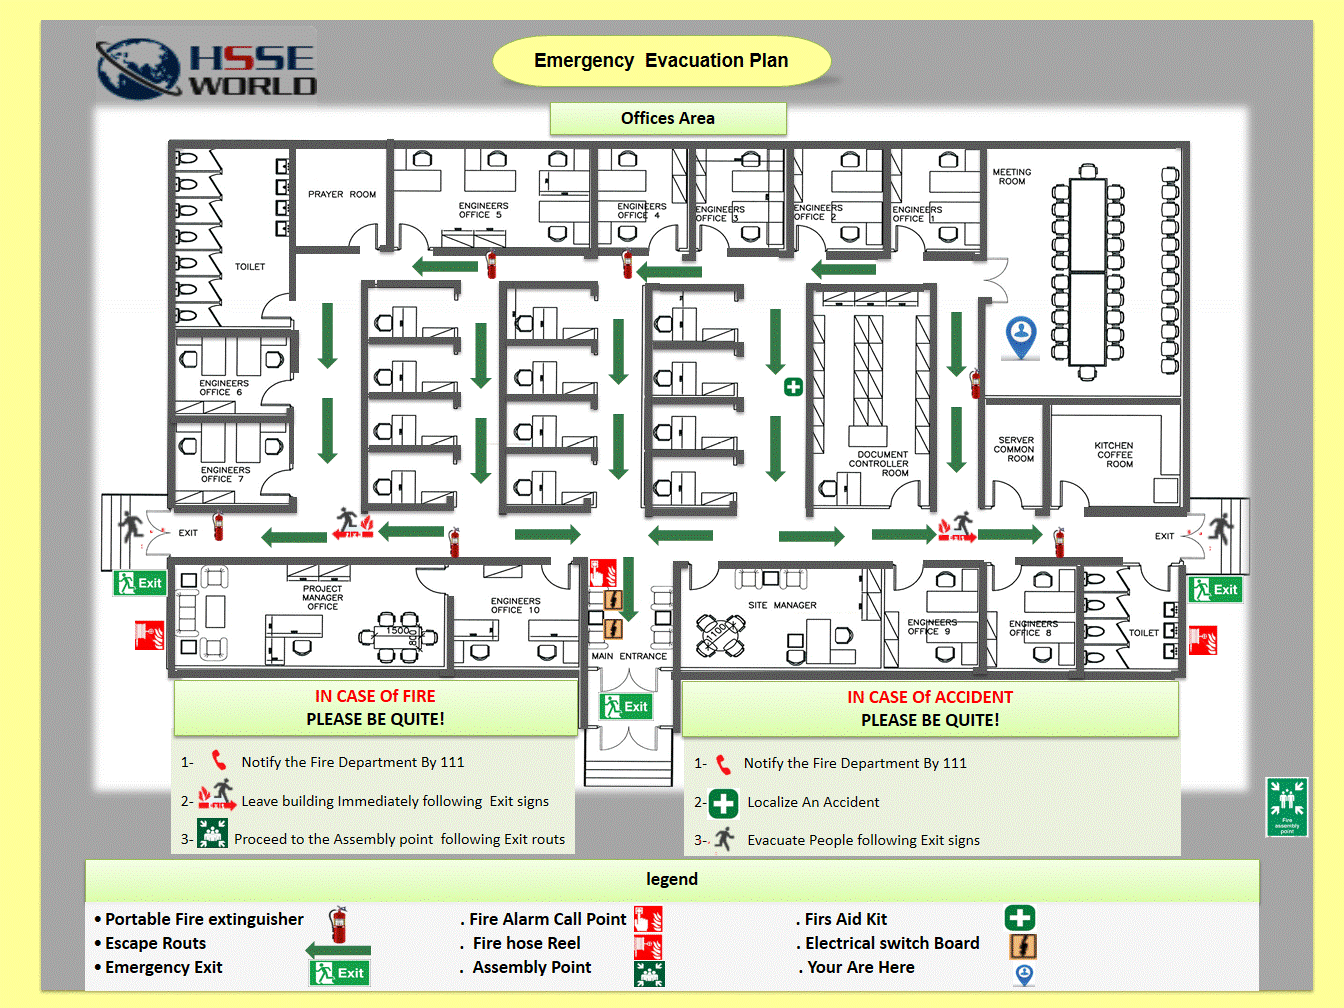 Fire Emergency Evacuation Plan and the Fire Procedure HSSE WORLD